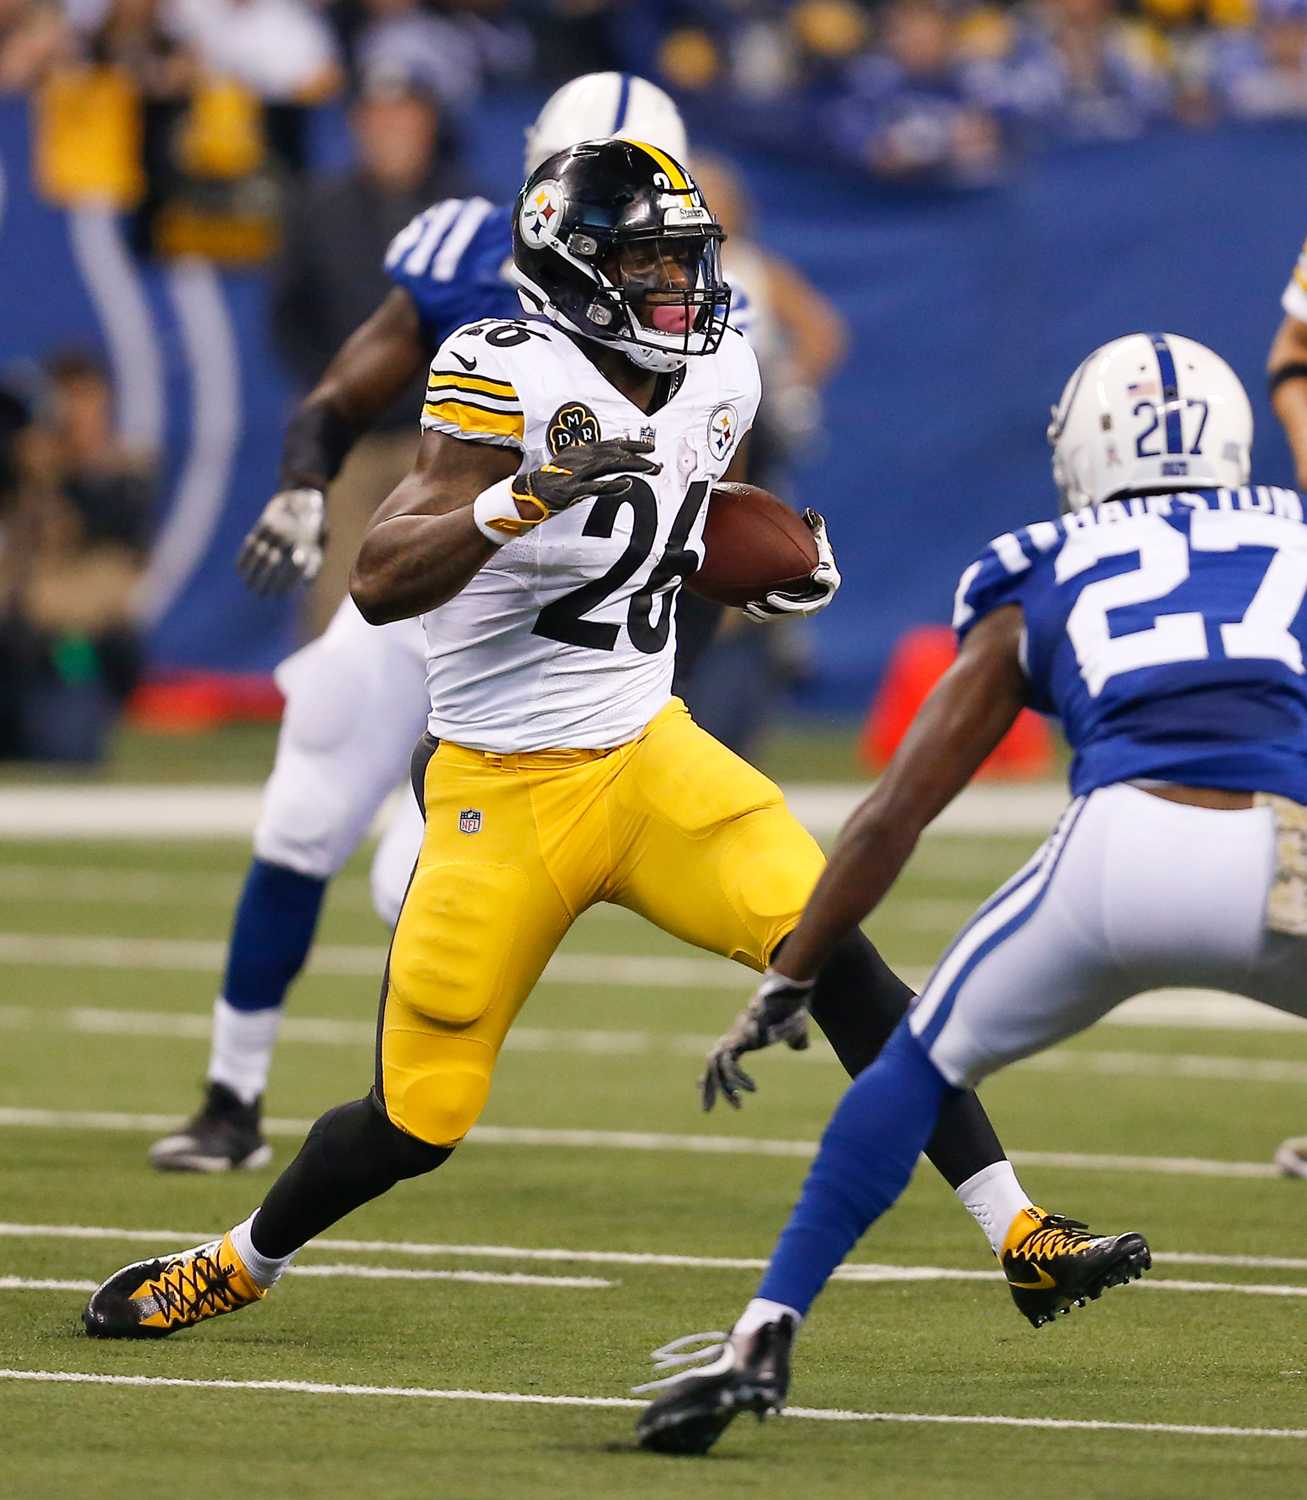 Pittsburgh Steelers running back Le'Veon Bell (26) runs upfield in first half action against the Indianapolis Colts Sunday, Nov. 12, 2017, at Lucas Oil Stadium in Indianapolis. The Steelers won, 20-17. (Sam Riche/TNS)